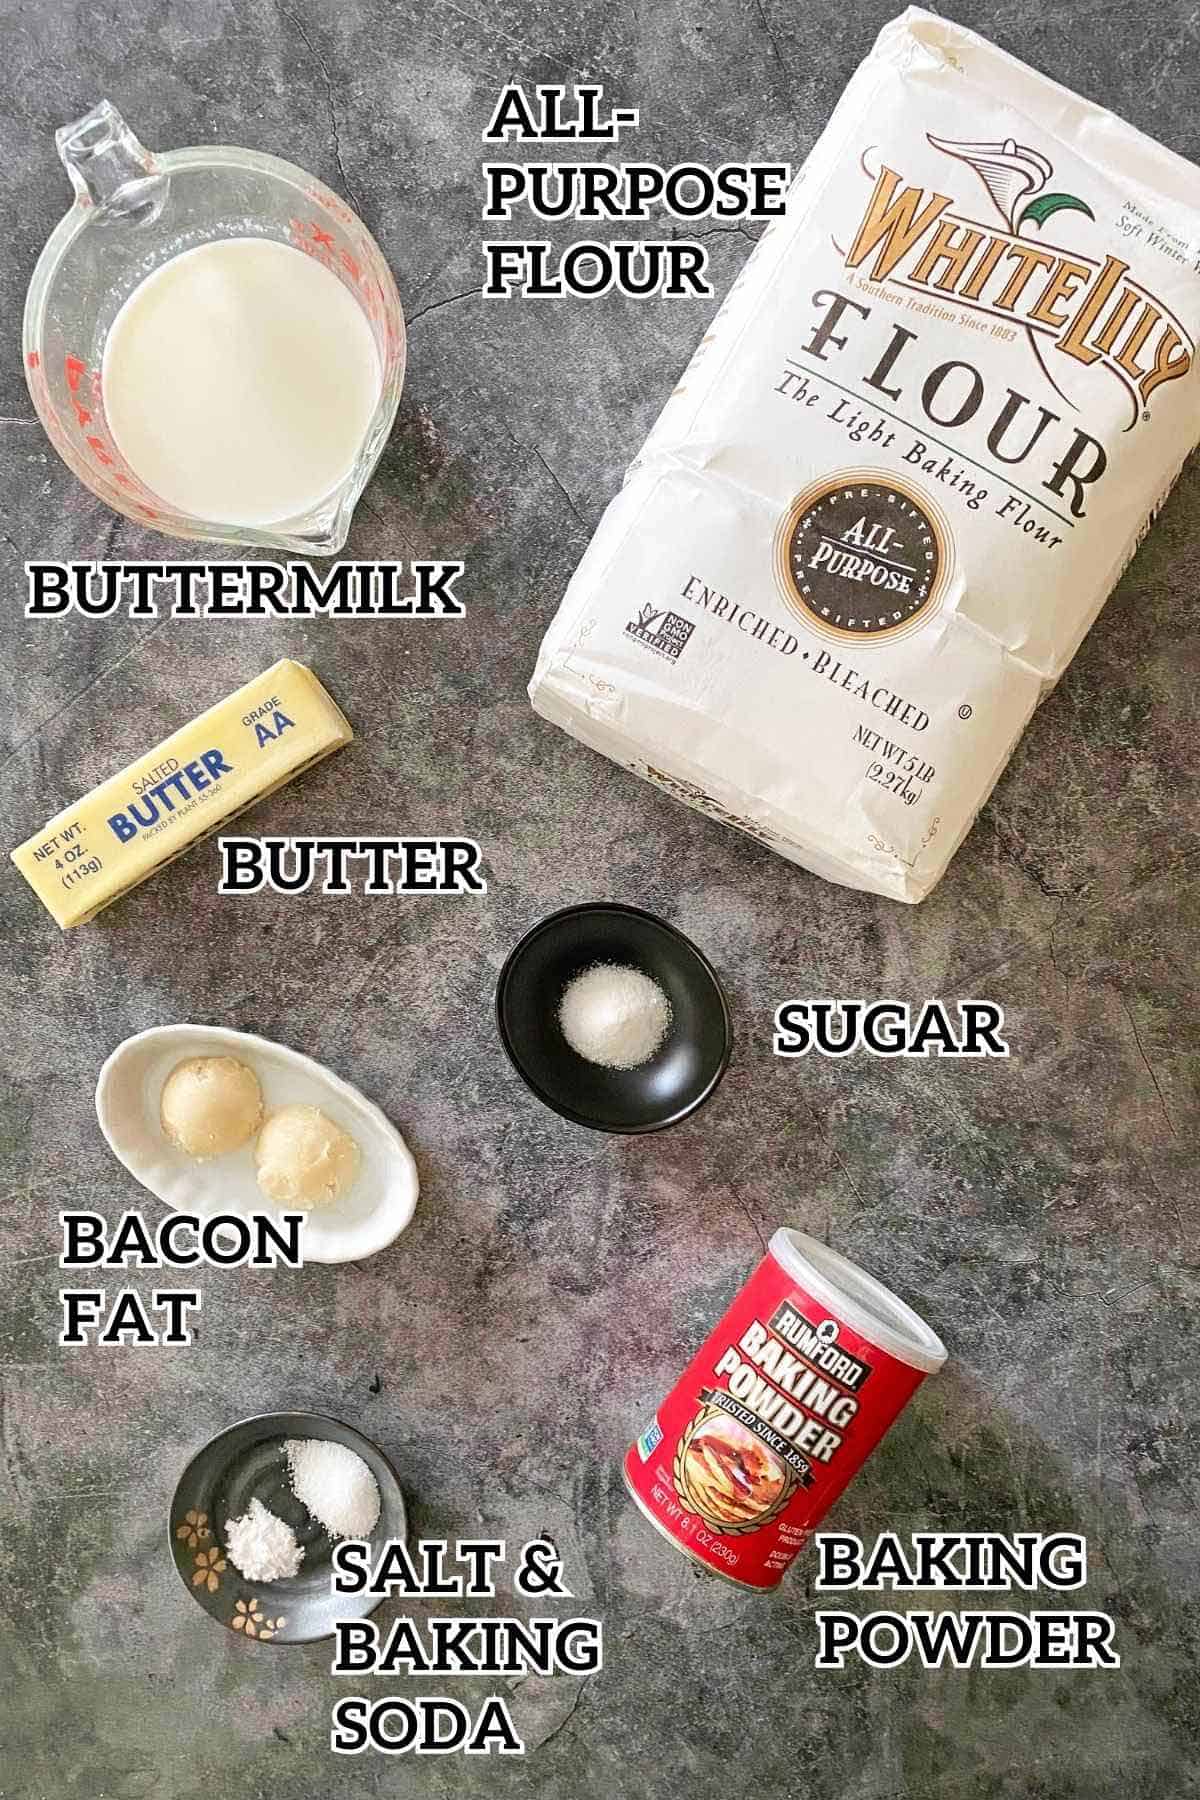 A bag of flour, buttermilk, butter, baking powder, bacon grease and other ingredients to make homemade bacon grease biscuits.